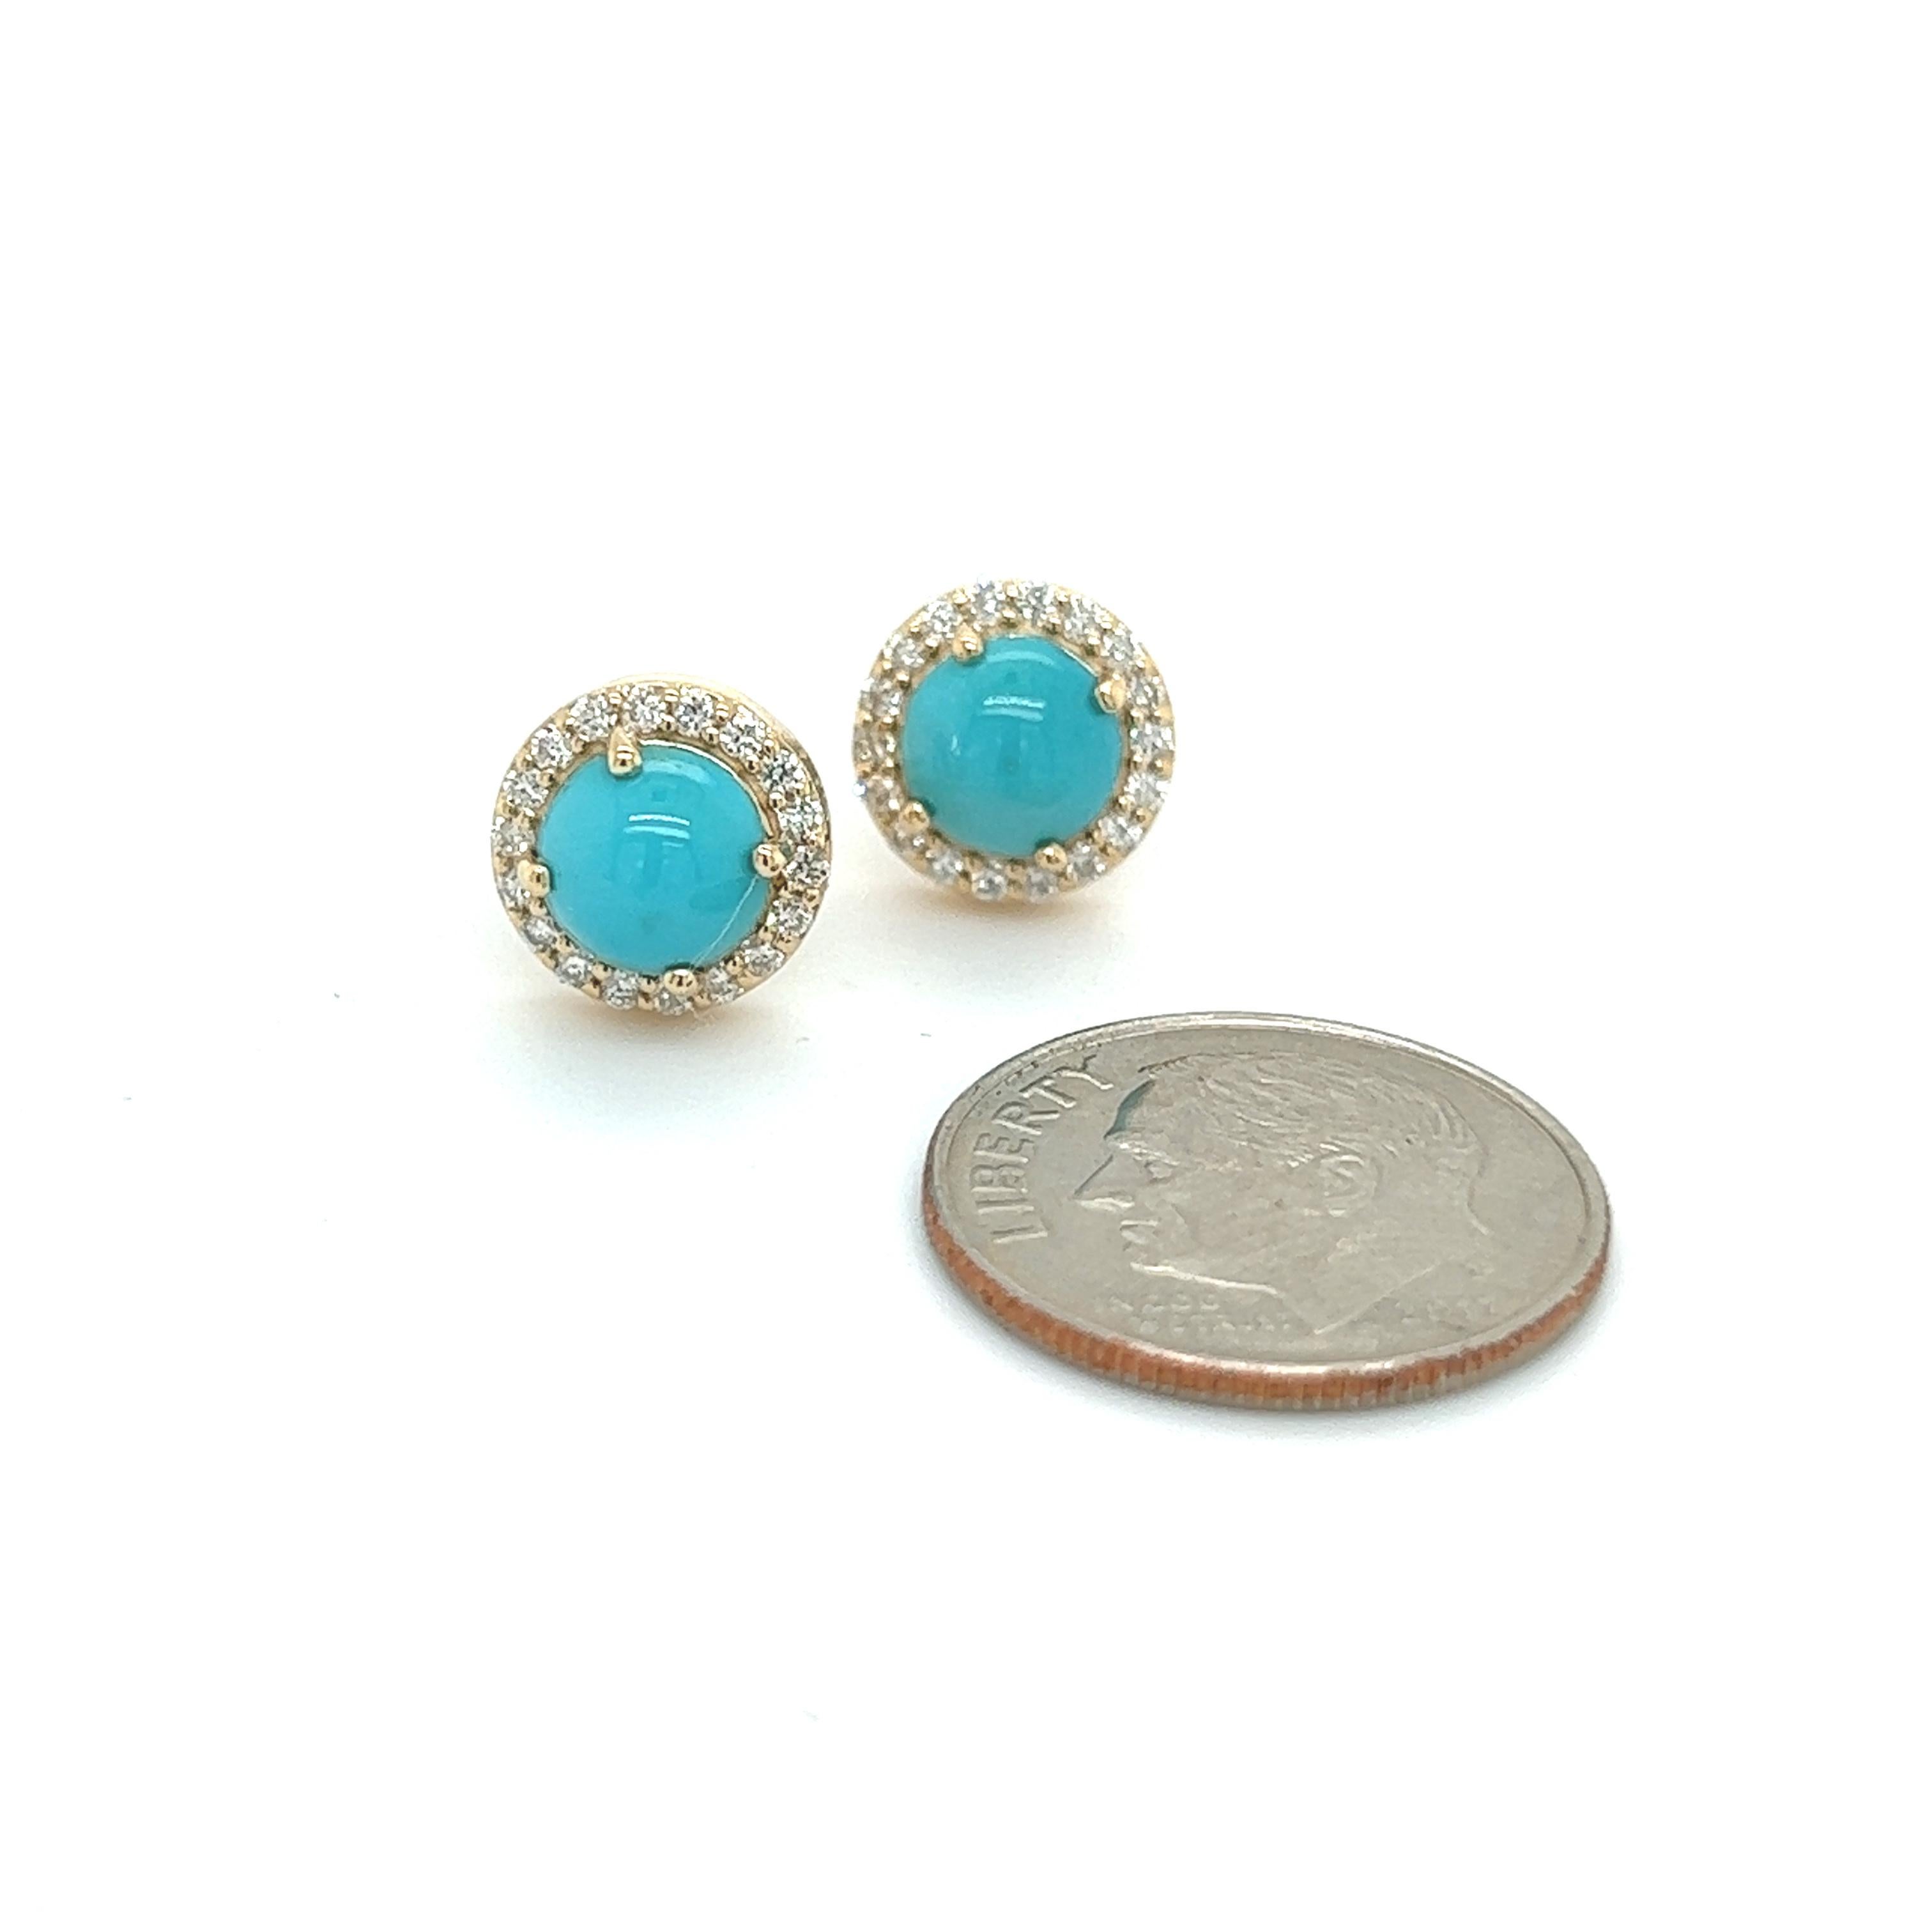 Round Cut Natural Turquoise Diamond Stud Earrings 14k Yellow Gold 2.18 TCW Certified For Sale